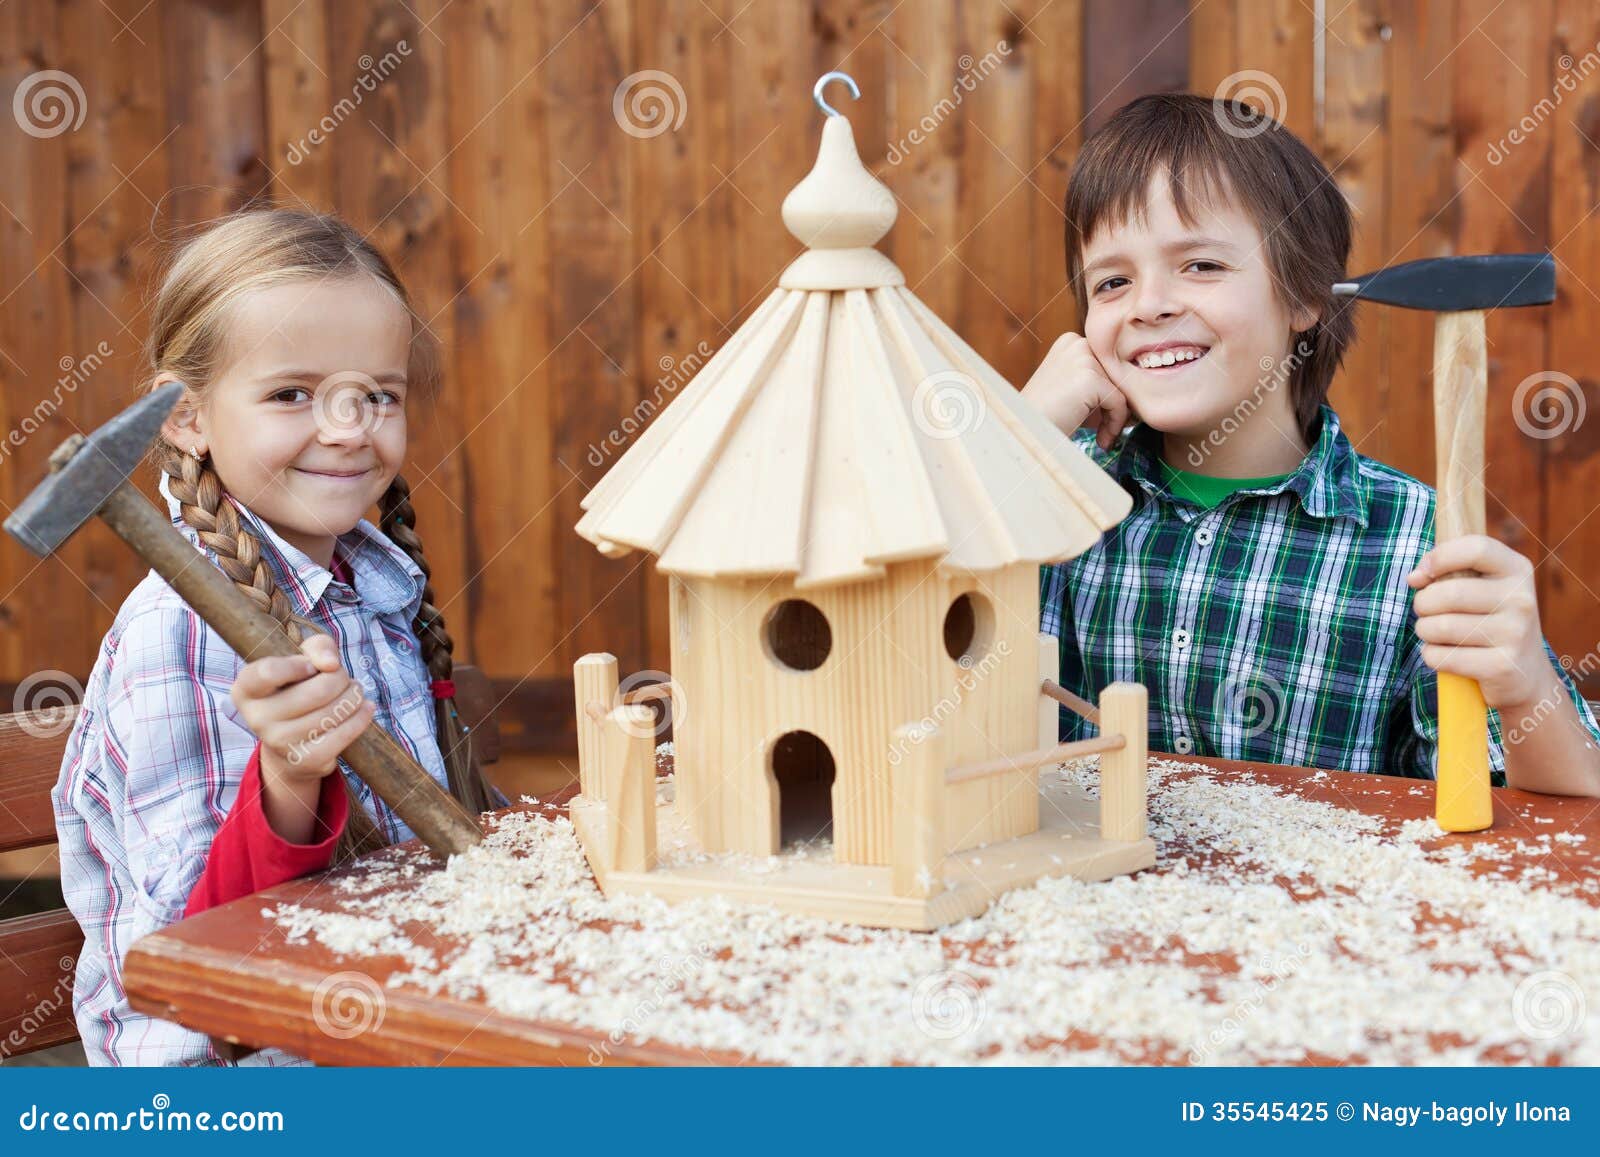 Happy Kids Building A Bird House Stock Image - Image of ...